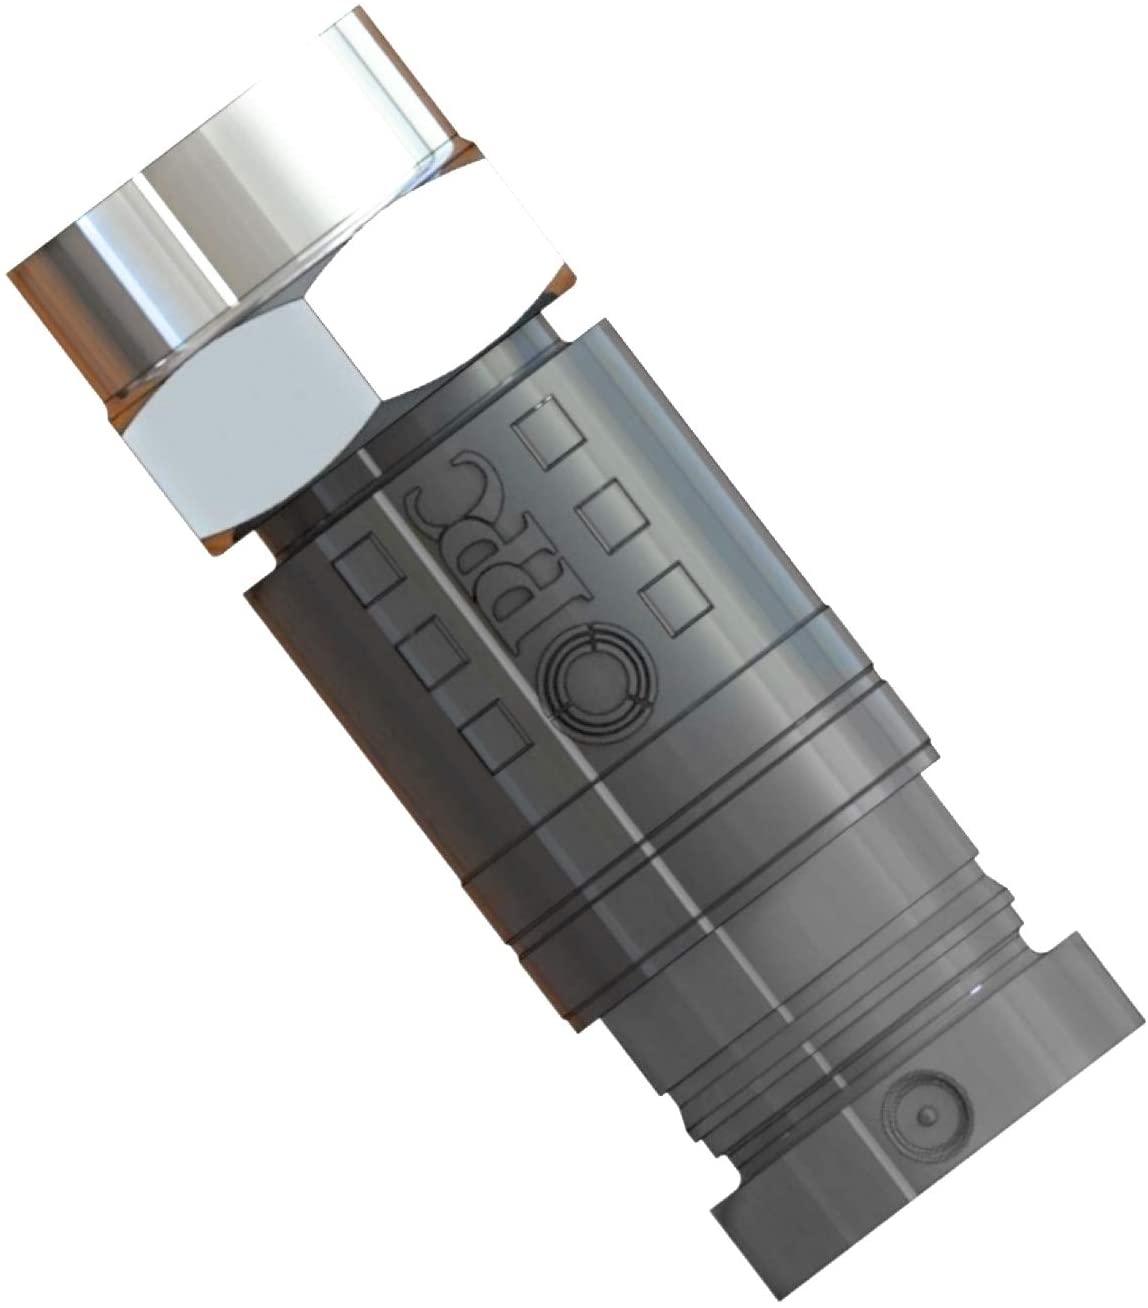 Compression F Connector CMX65 Professional for CT63 WF65 Shotgun Twin Sky coax Satellite Cable - as used by the leading Uk Satellite Company